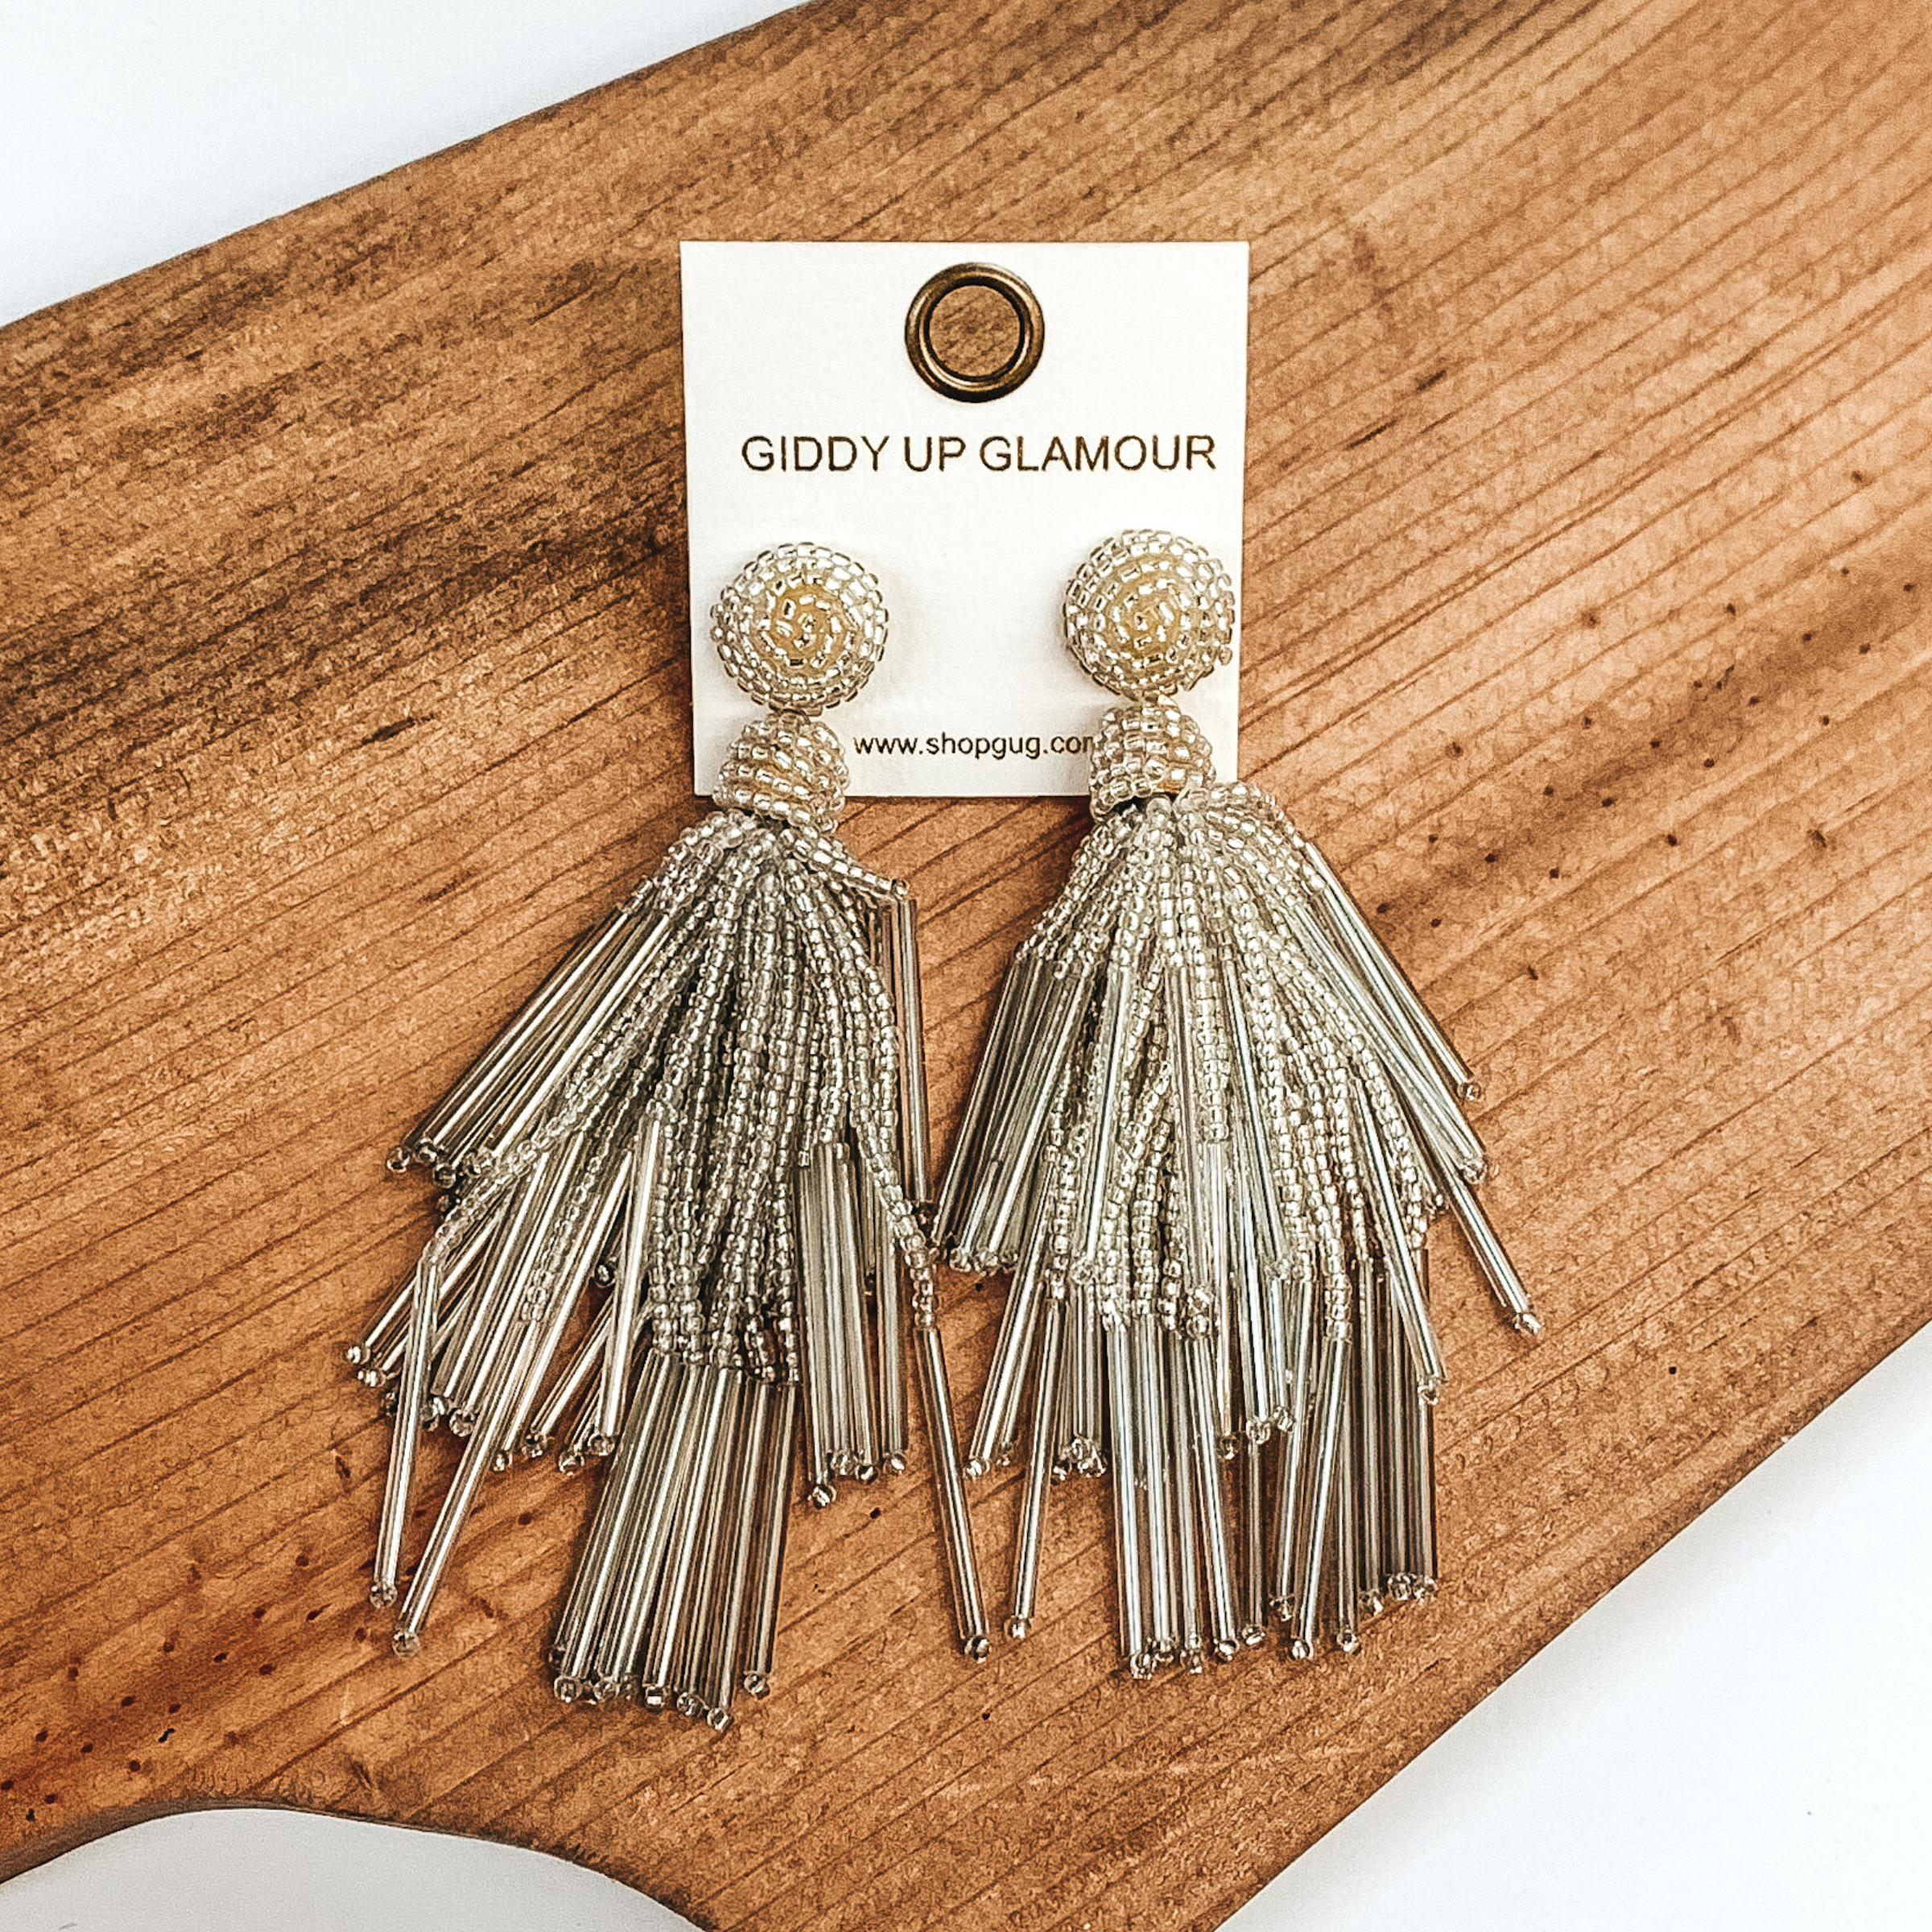 Circle beaded stud earrings with a beaded tassel in silver. These earrings are pictured laying on a brown piece of wood on a white background.